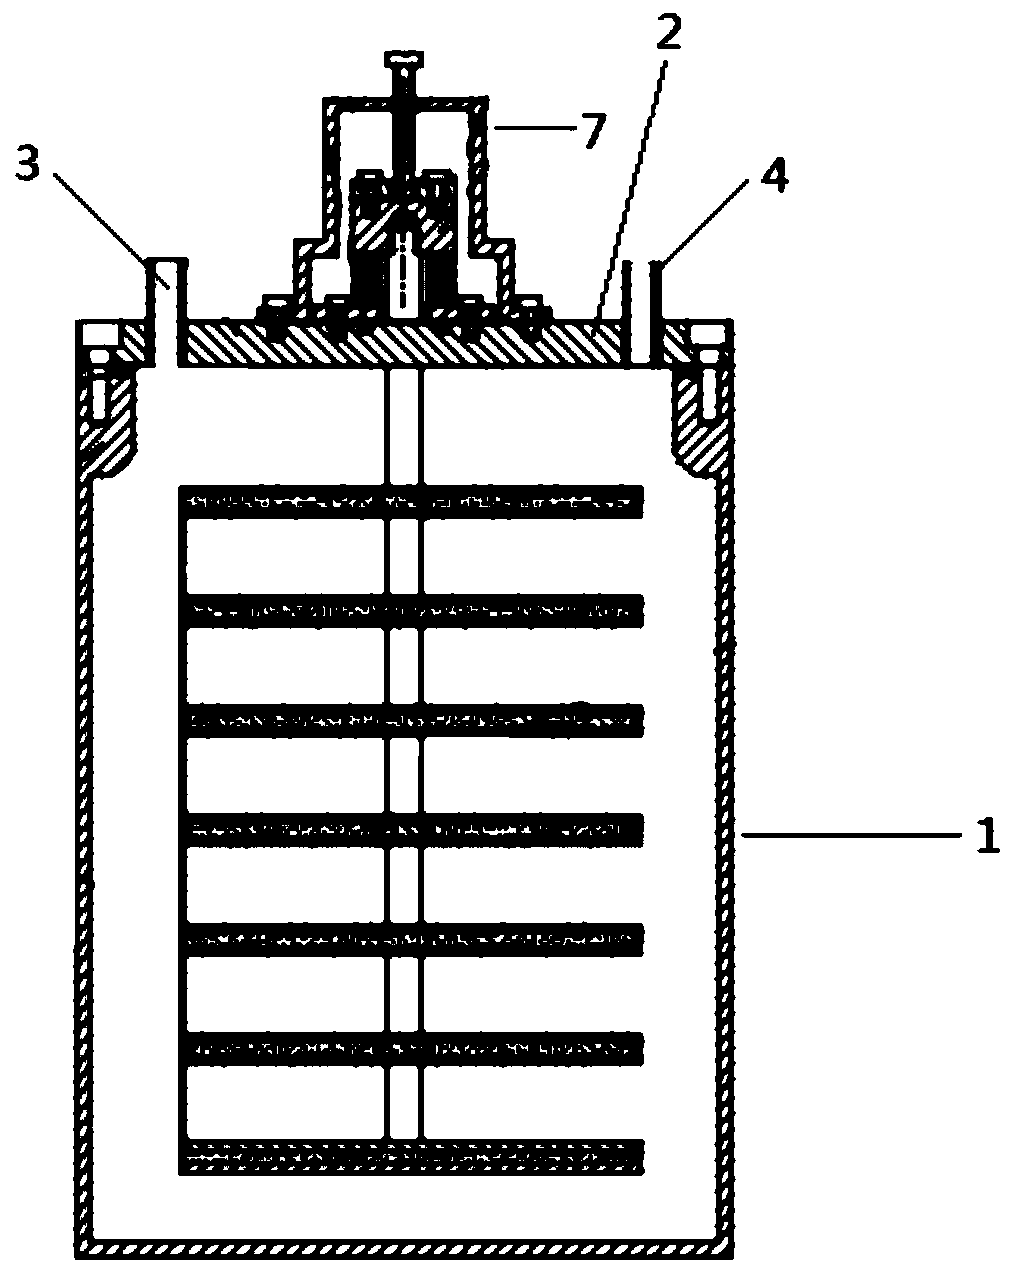 Source bottle and semiconductor equipment